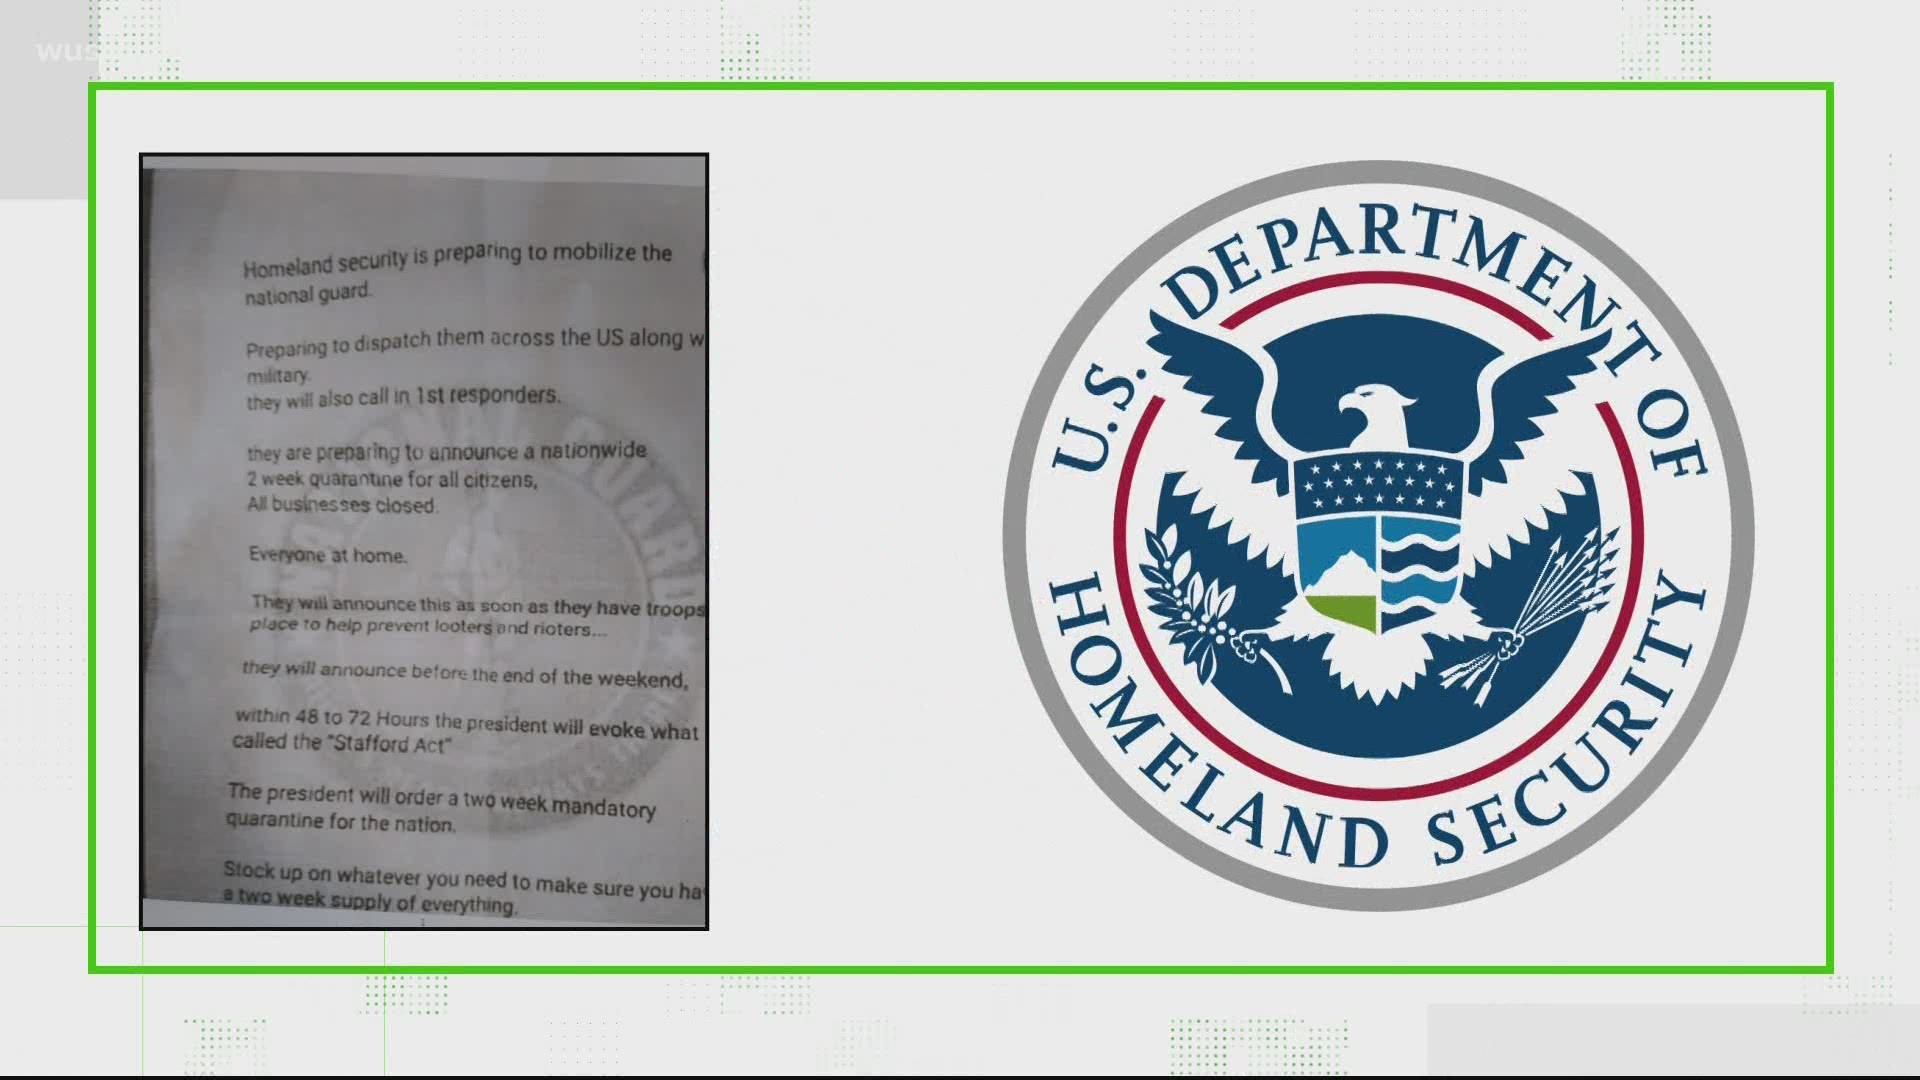 The Verify team digs into the rumor on a flyer that said Homeland Security will use the National Guard and U.S. Military to invoke a two week quarantine